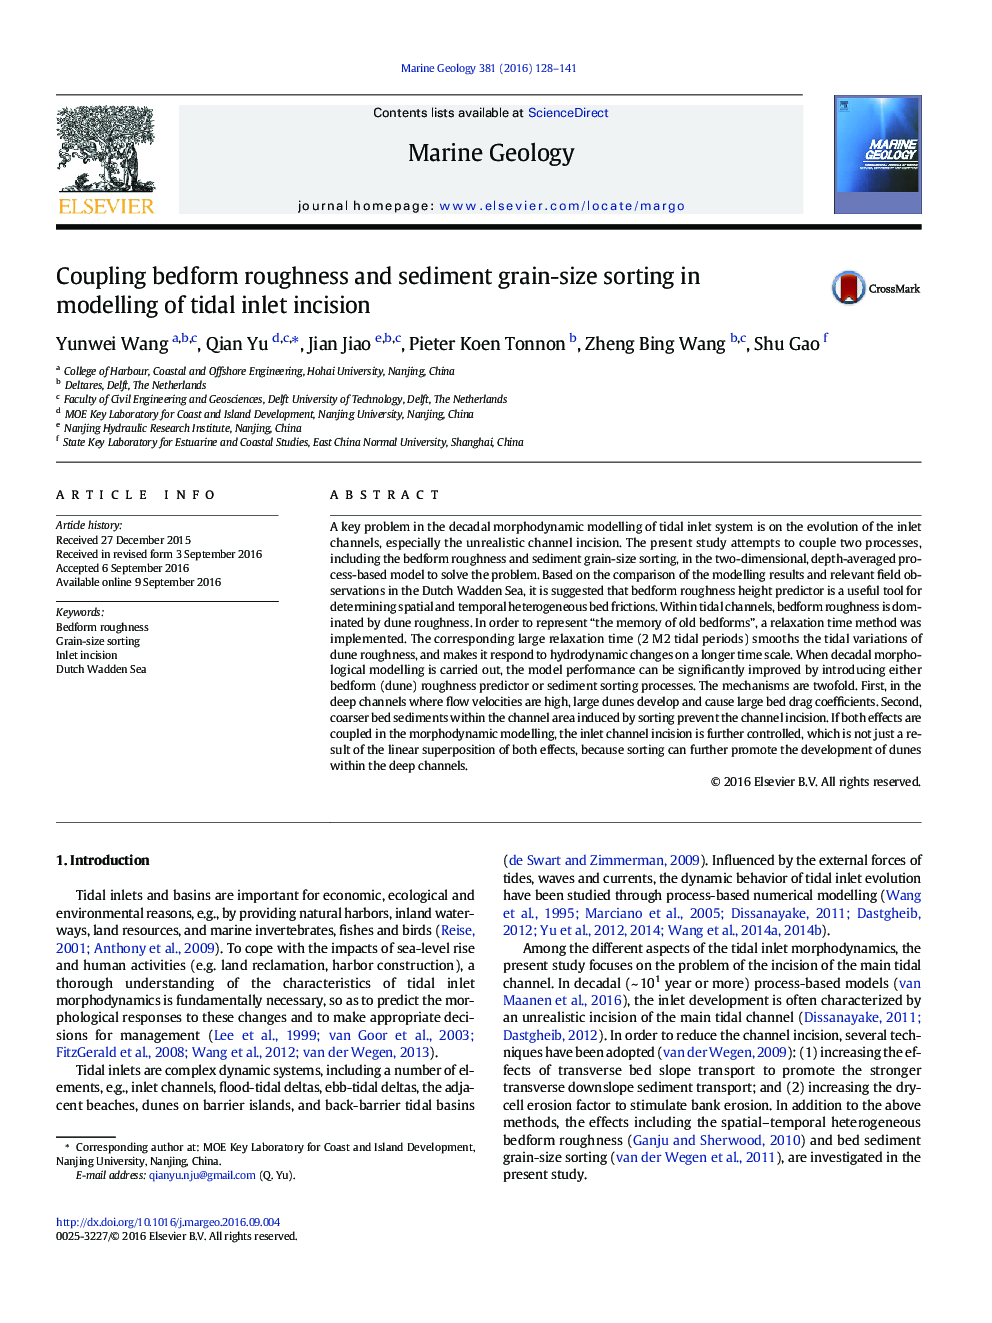 Coupling bedform roughness and sediment grain-size sorting in modelling of tidal inlet incision